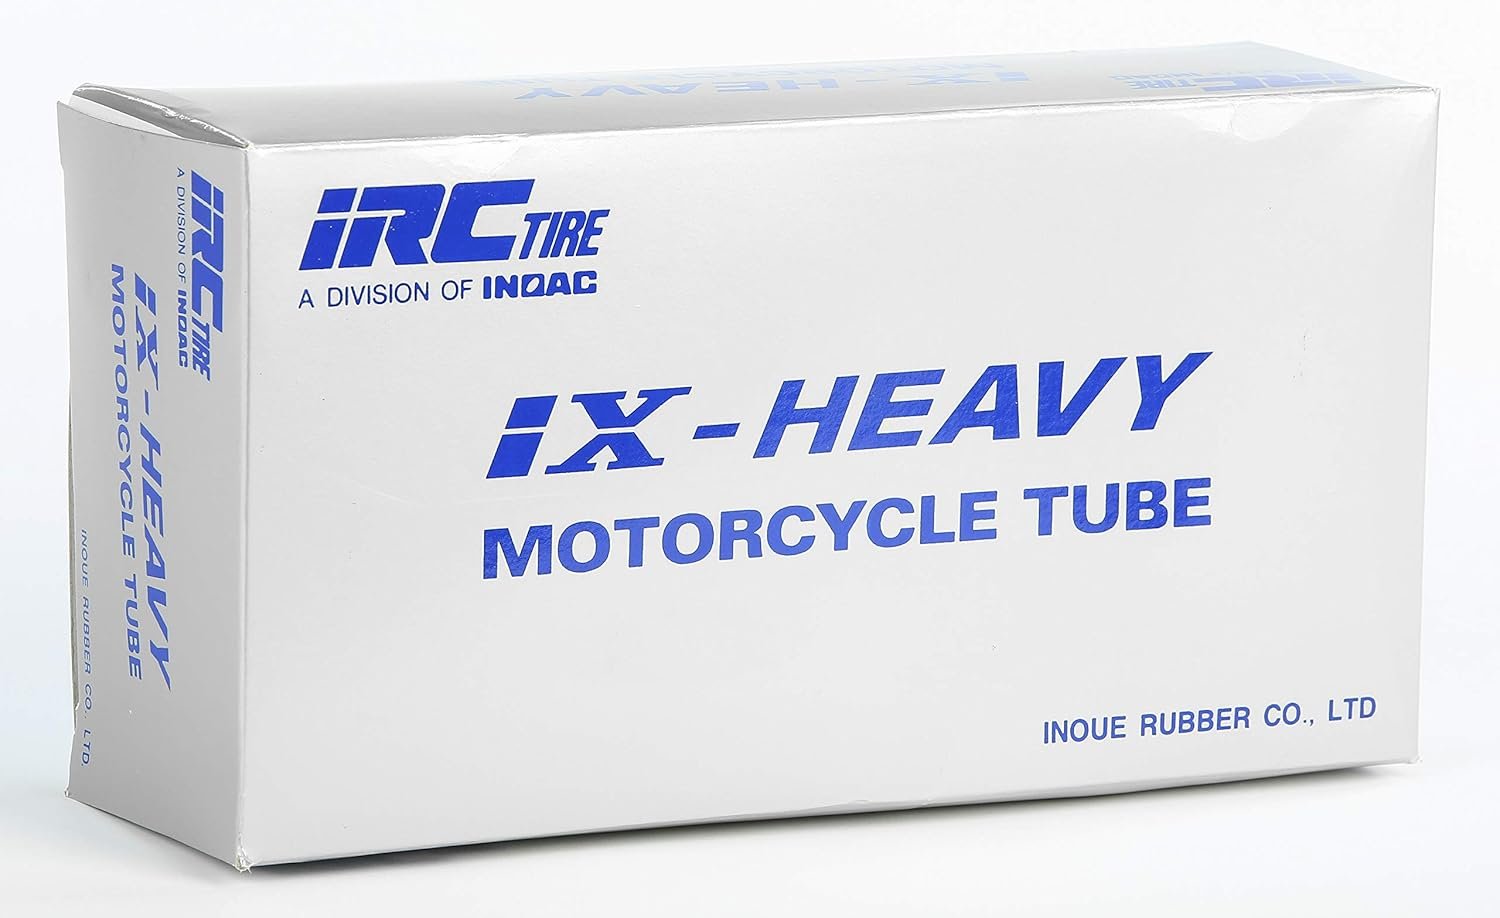 Standard Motorcycle Tube 80/100-21 HEAVY DUTY Review